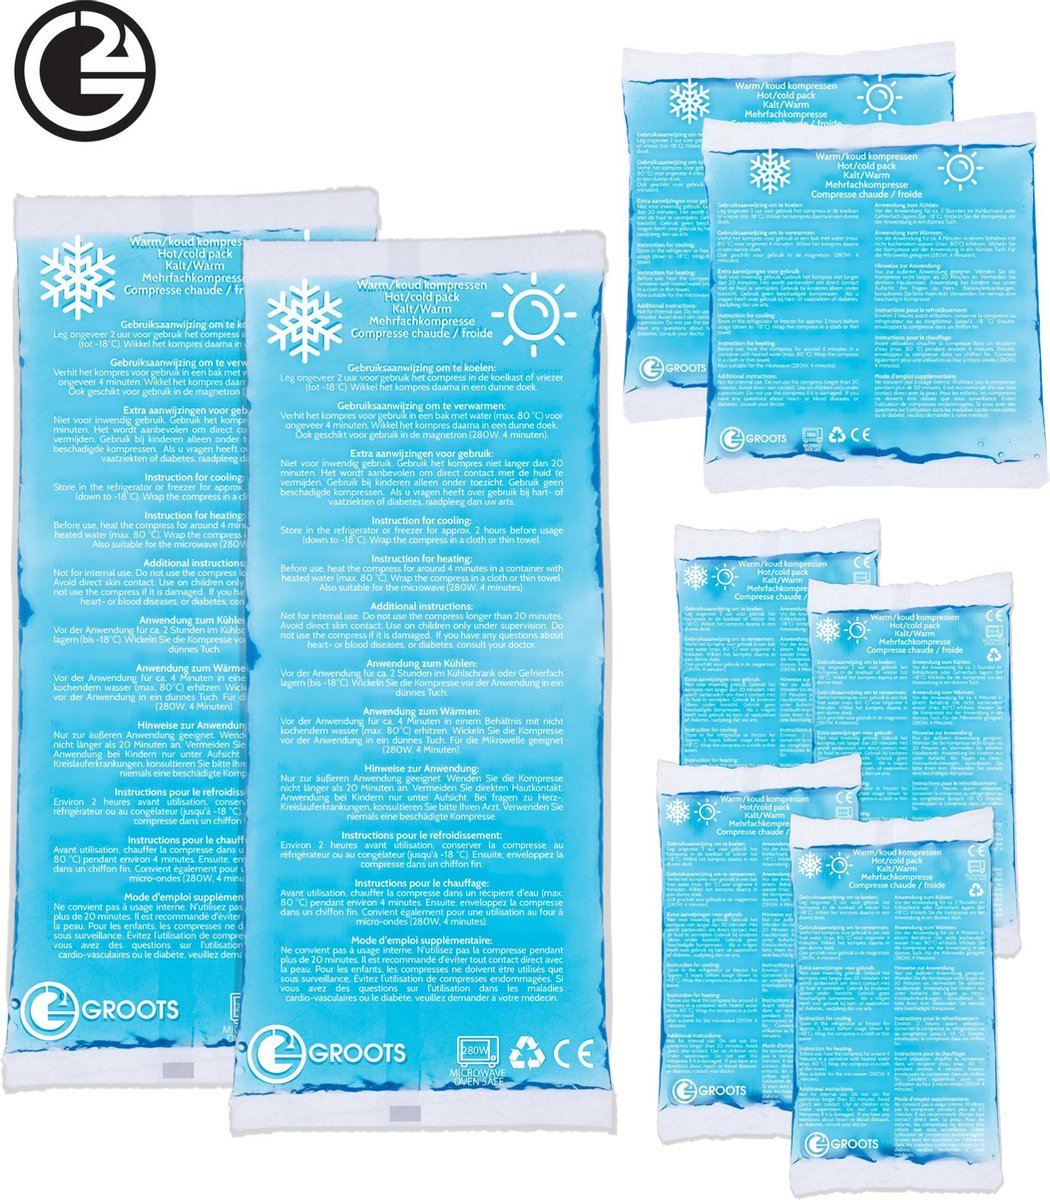 affix Gewoon Inloggegevens Groots® Warm-Koud Kompres –Inclusief 8x TwoTherapy™ Gel Pack – Hot en Cold  Pack | bol.com